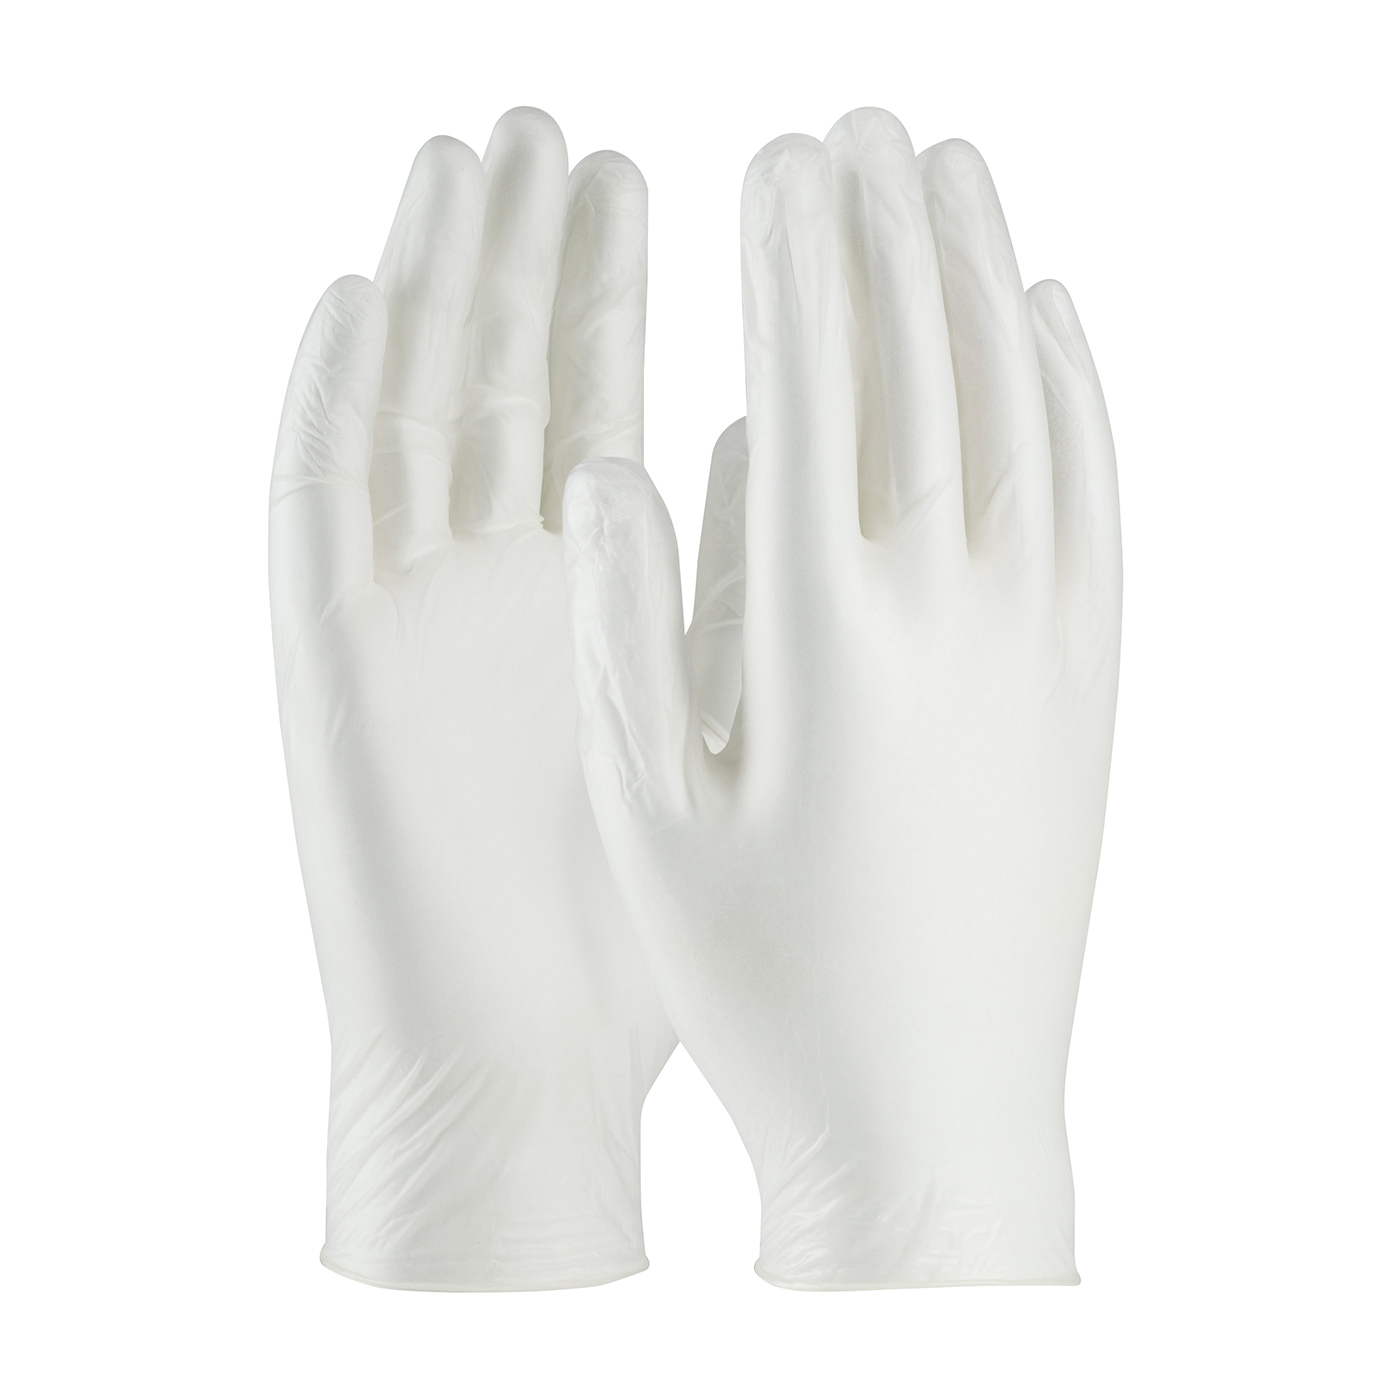 PIP® Ambi-dex® 64-V2000PF/S Disposable Gloves, S, Vinyl, Translucent White, 9.4 in L, Non-Powdered, 4 mil THK, Application Type: Industrial Grade, Ambidextrous Hand